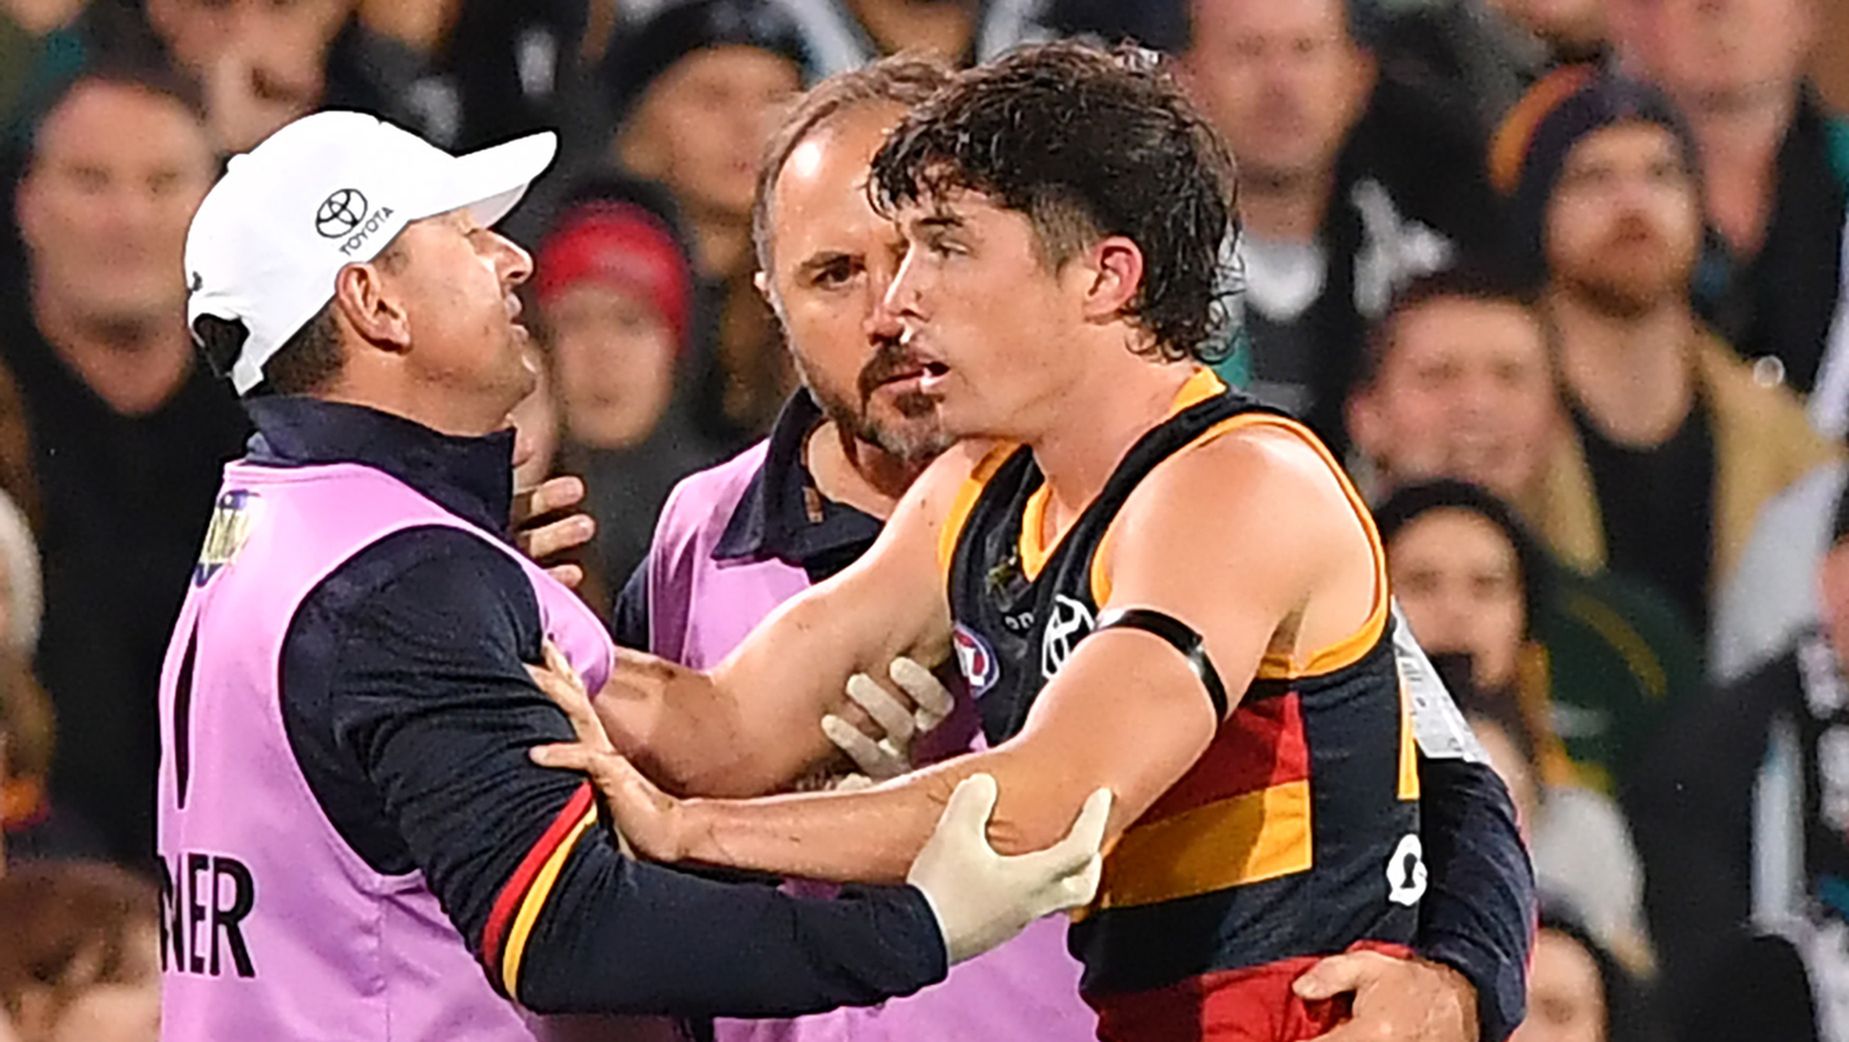 Ned McHenry of the Crows is attended to by a trainer after sustaining a knock to the head.